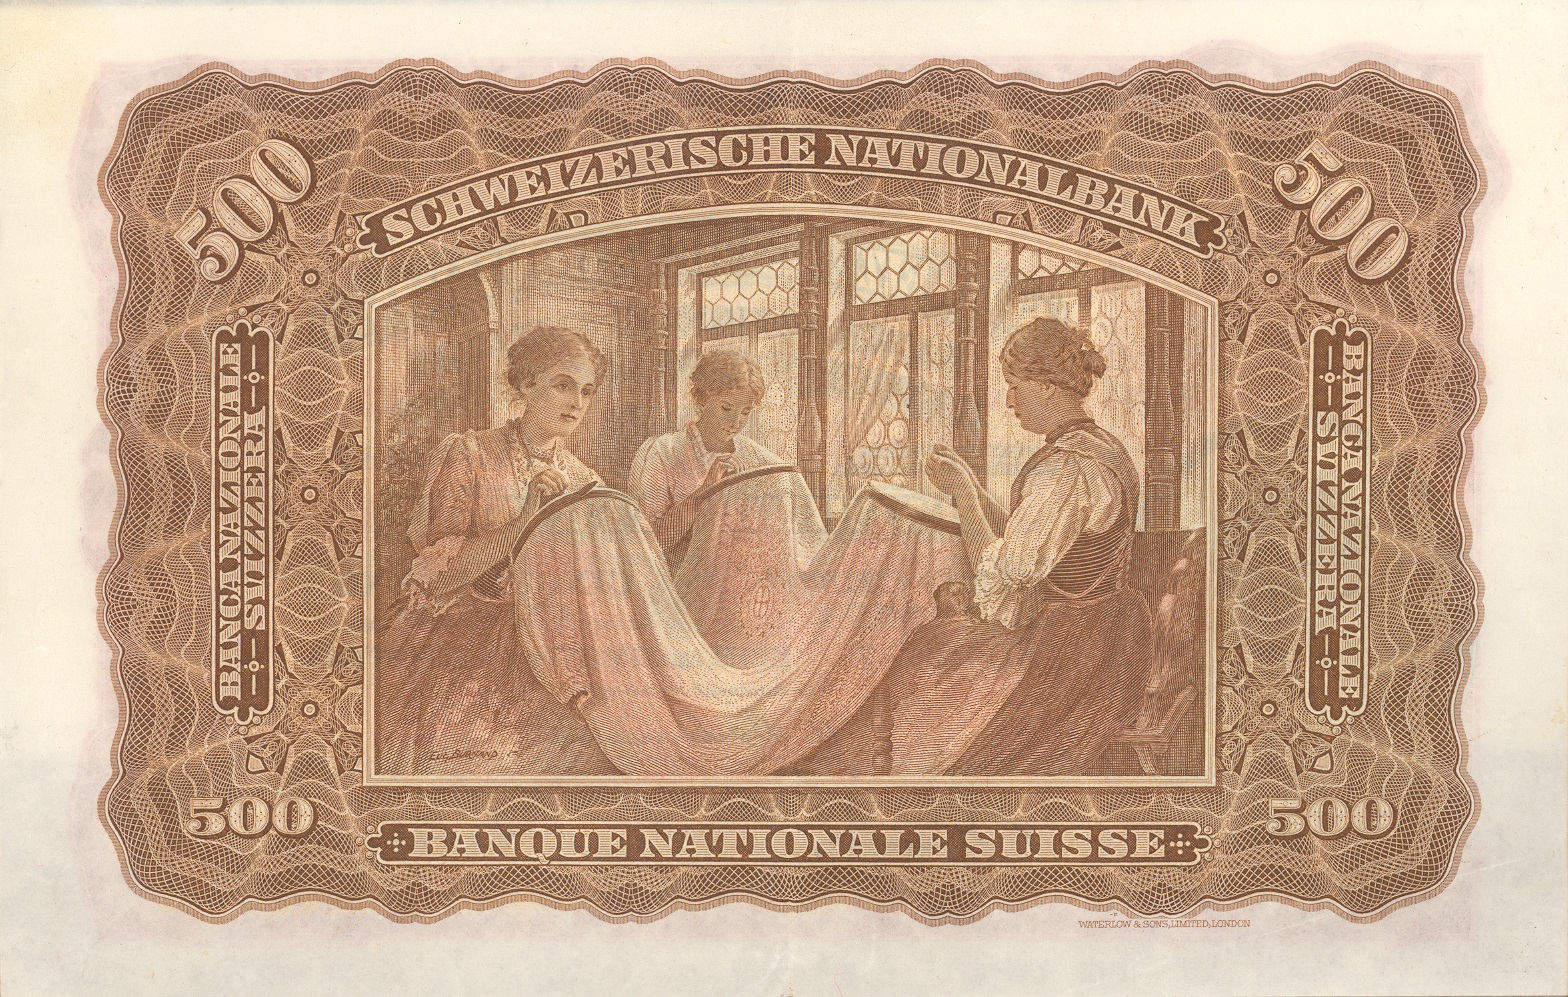 Second banknote series, 1911, 500 franc note, back